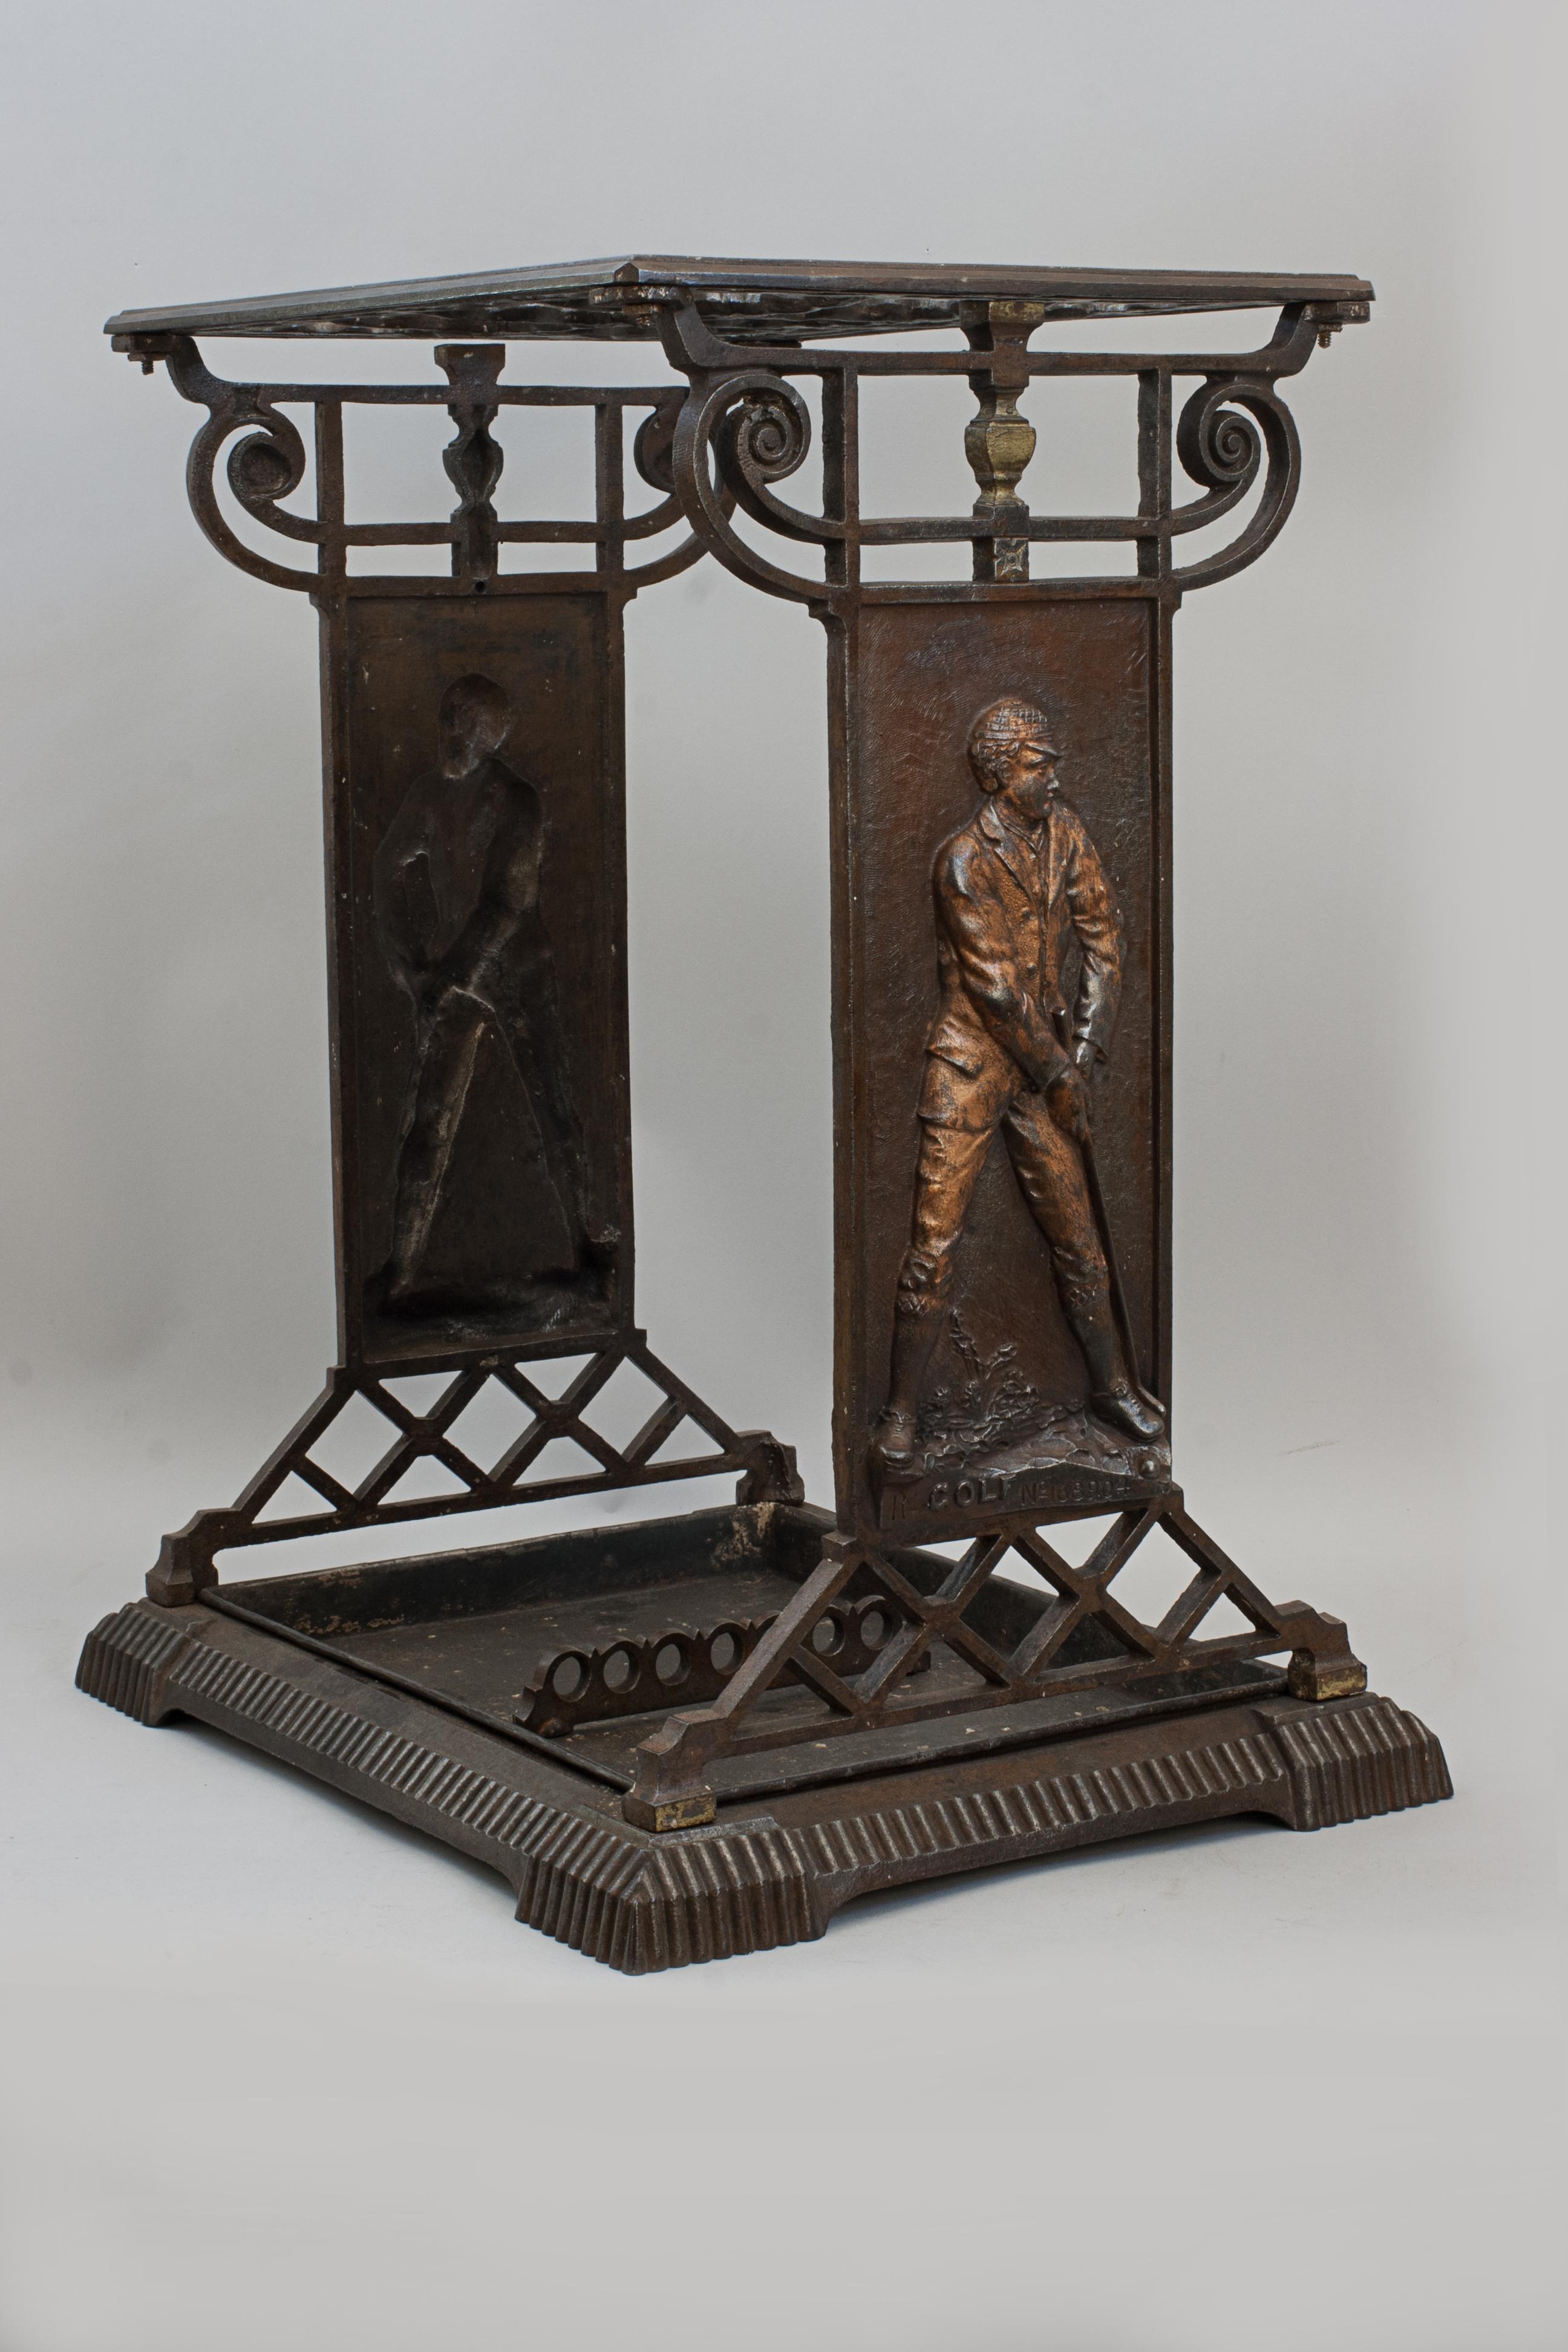 Cast Iron Umbrella Stand With Golf Figure For Sale 3